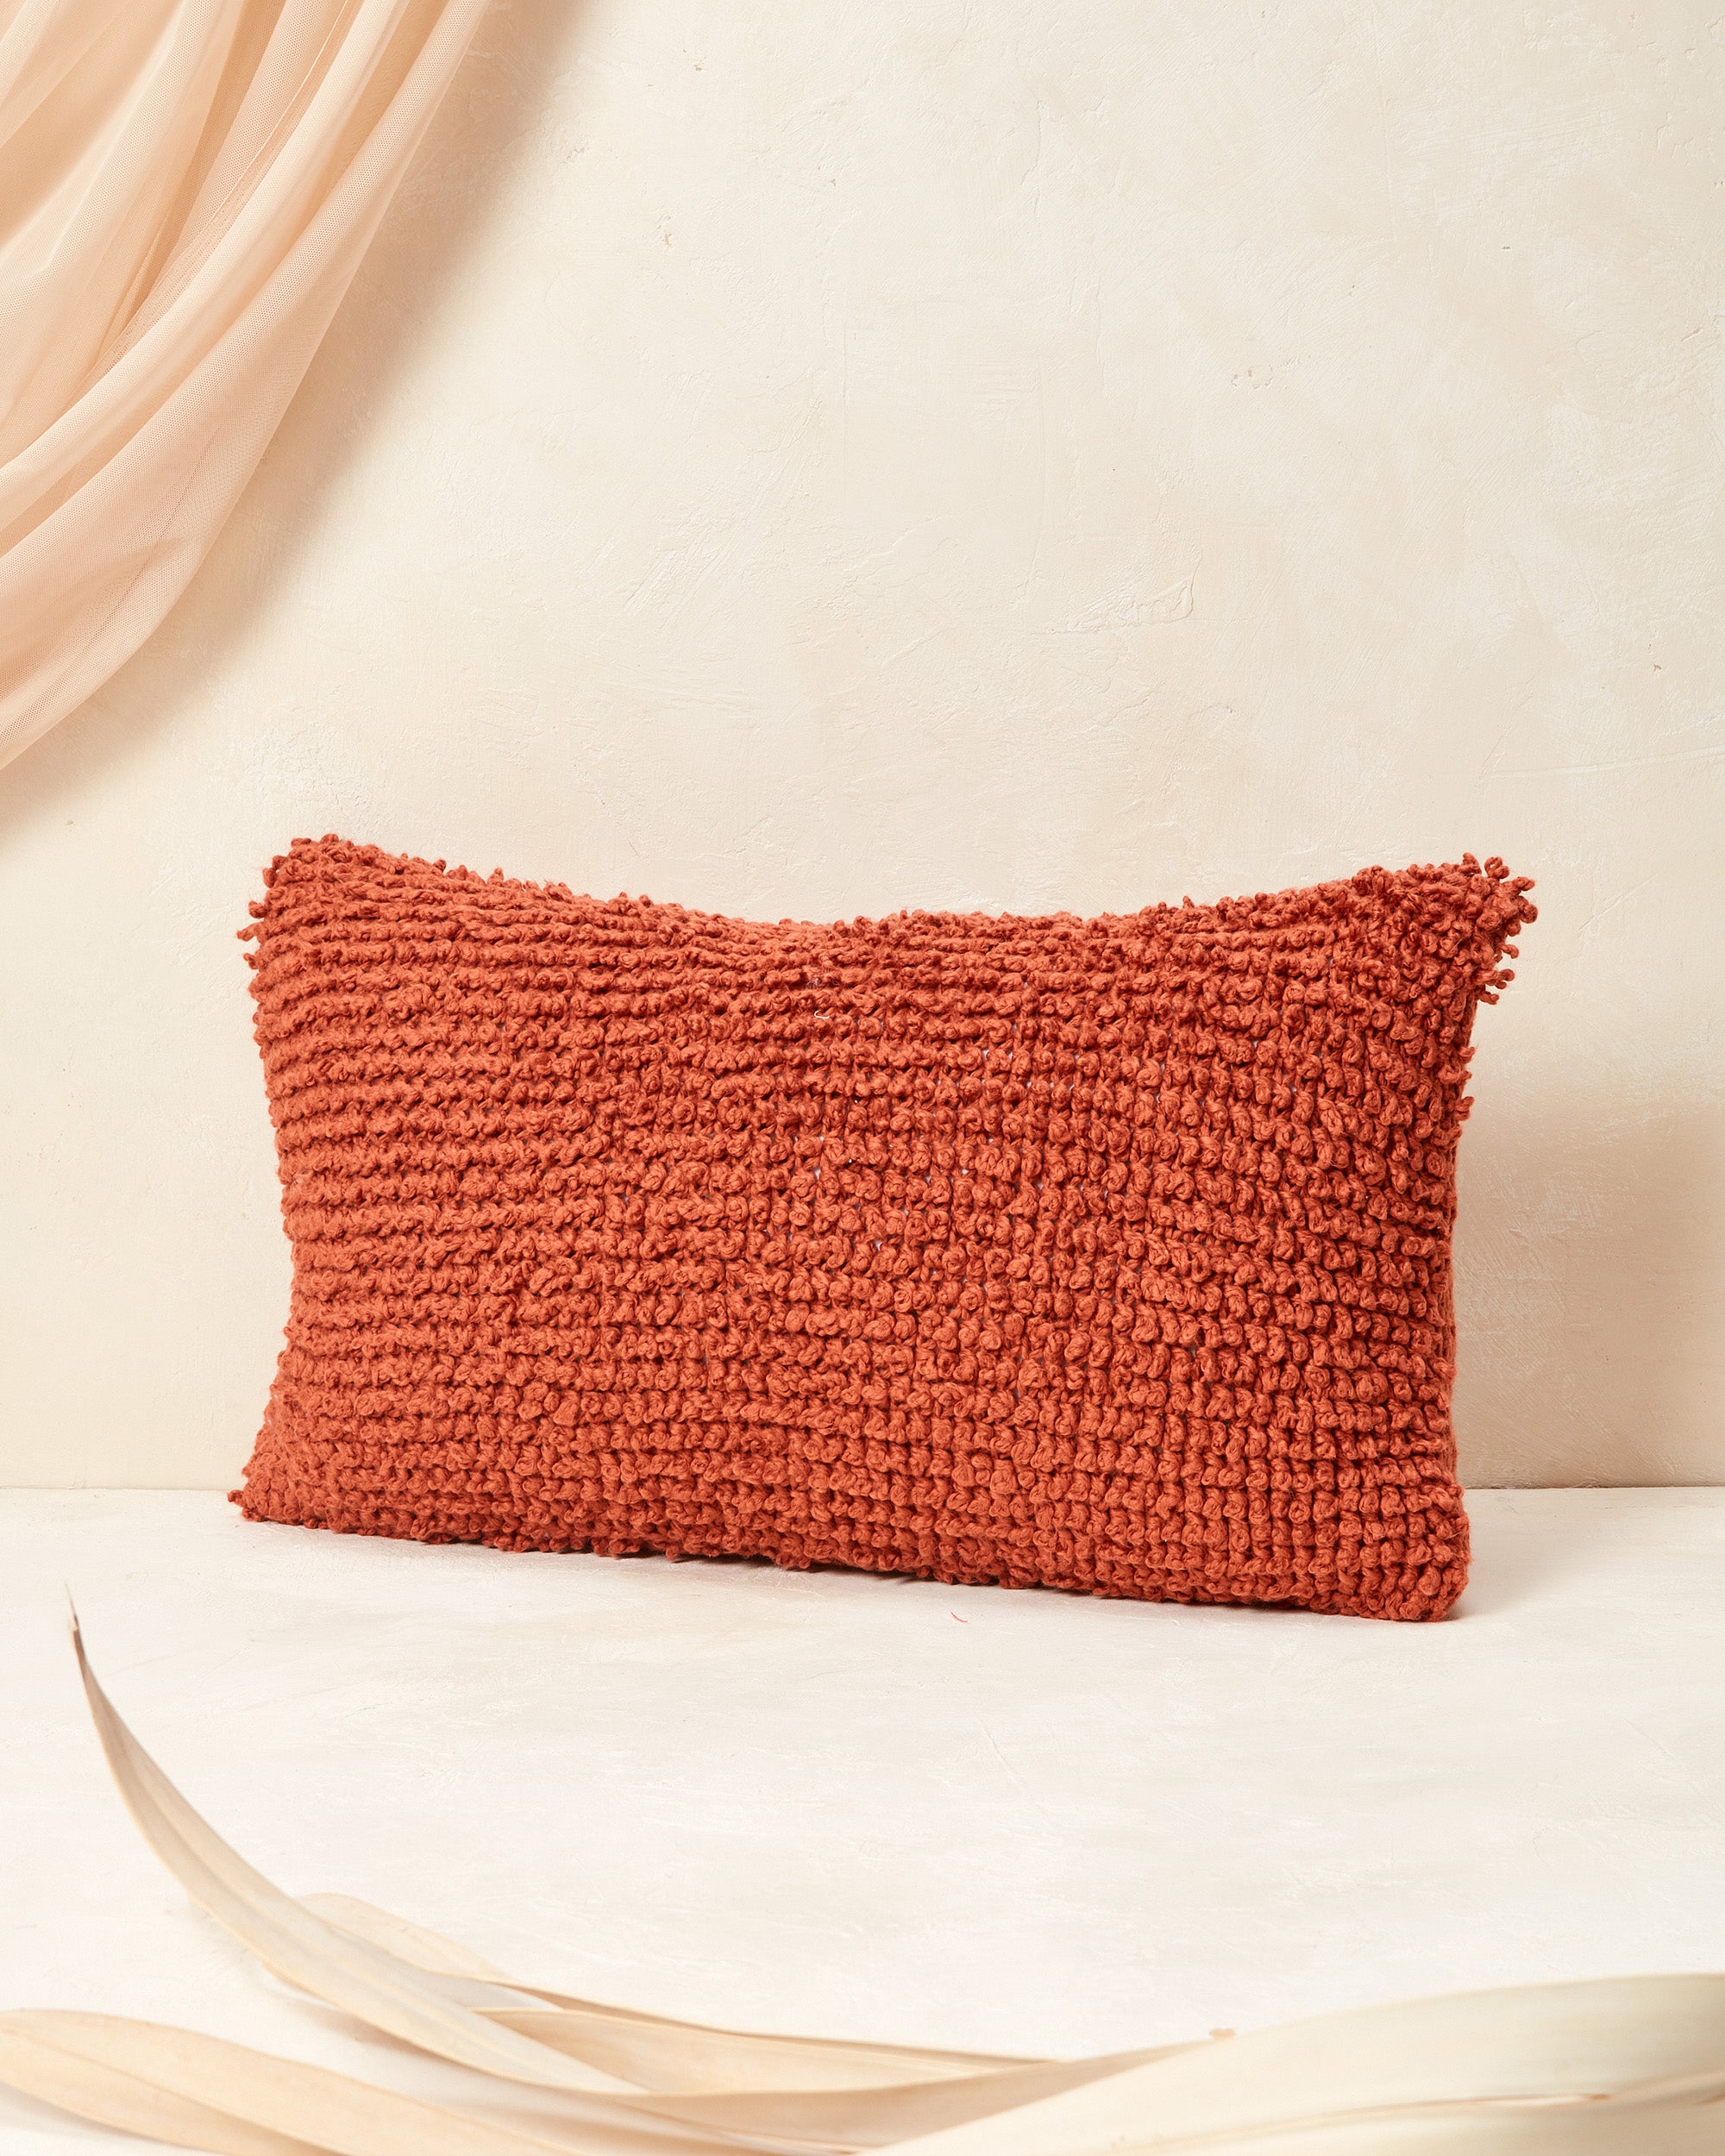 Ethically handmade hand knit decorative throw pillow. The MINNA Cloud Pillow in Persimmon, 100% GOTS-certified cotton textural throw pillow.